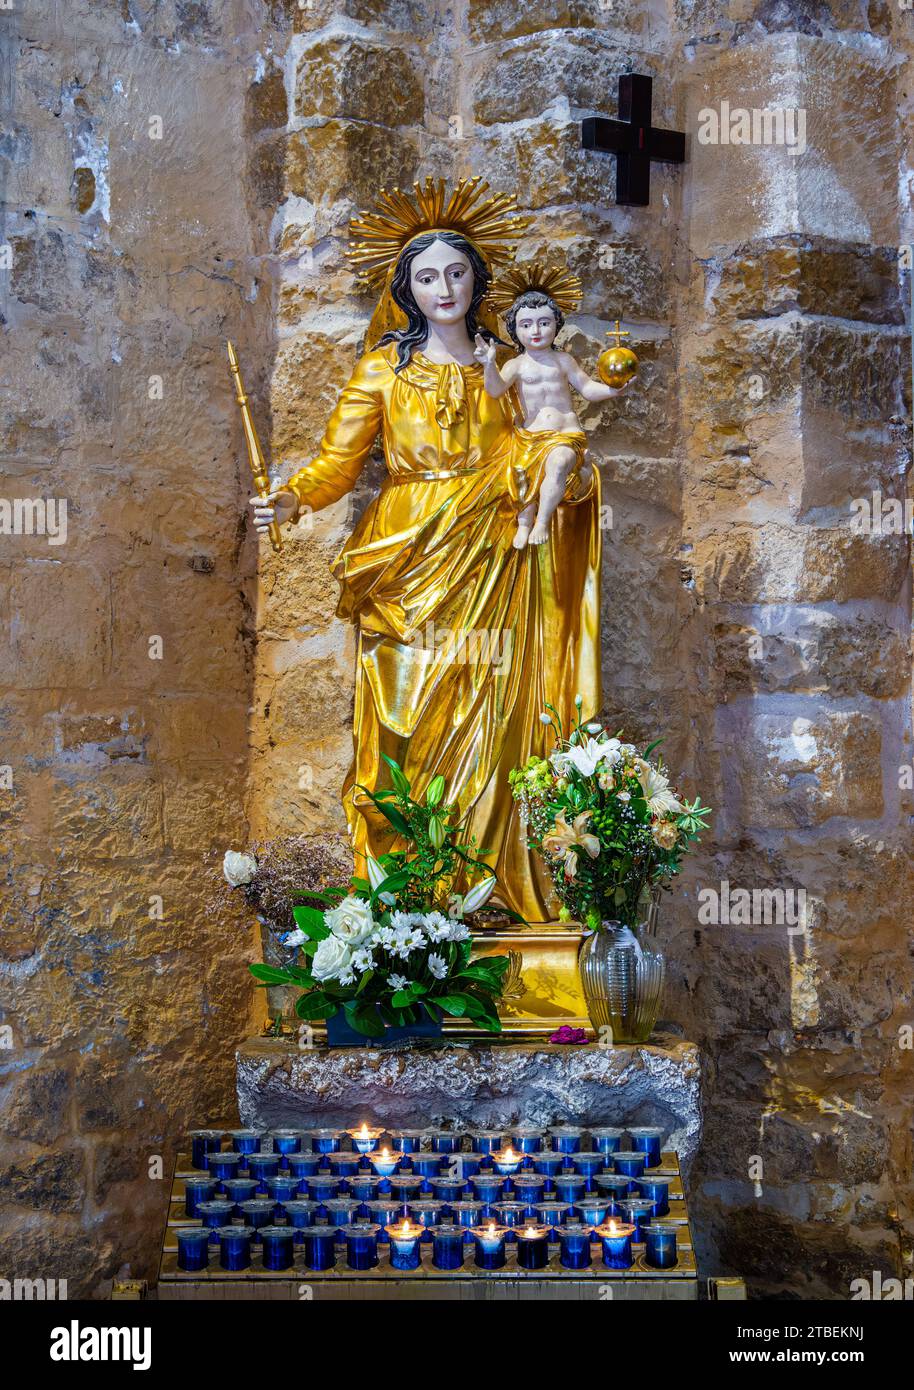 Saintes Maries de la Mer, France - October 3, 2023: The statue of the holy Mary with Jesus - Notre Dame de la Mer - Our lady of the sea Stock Photo